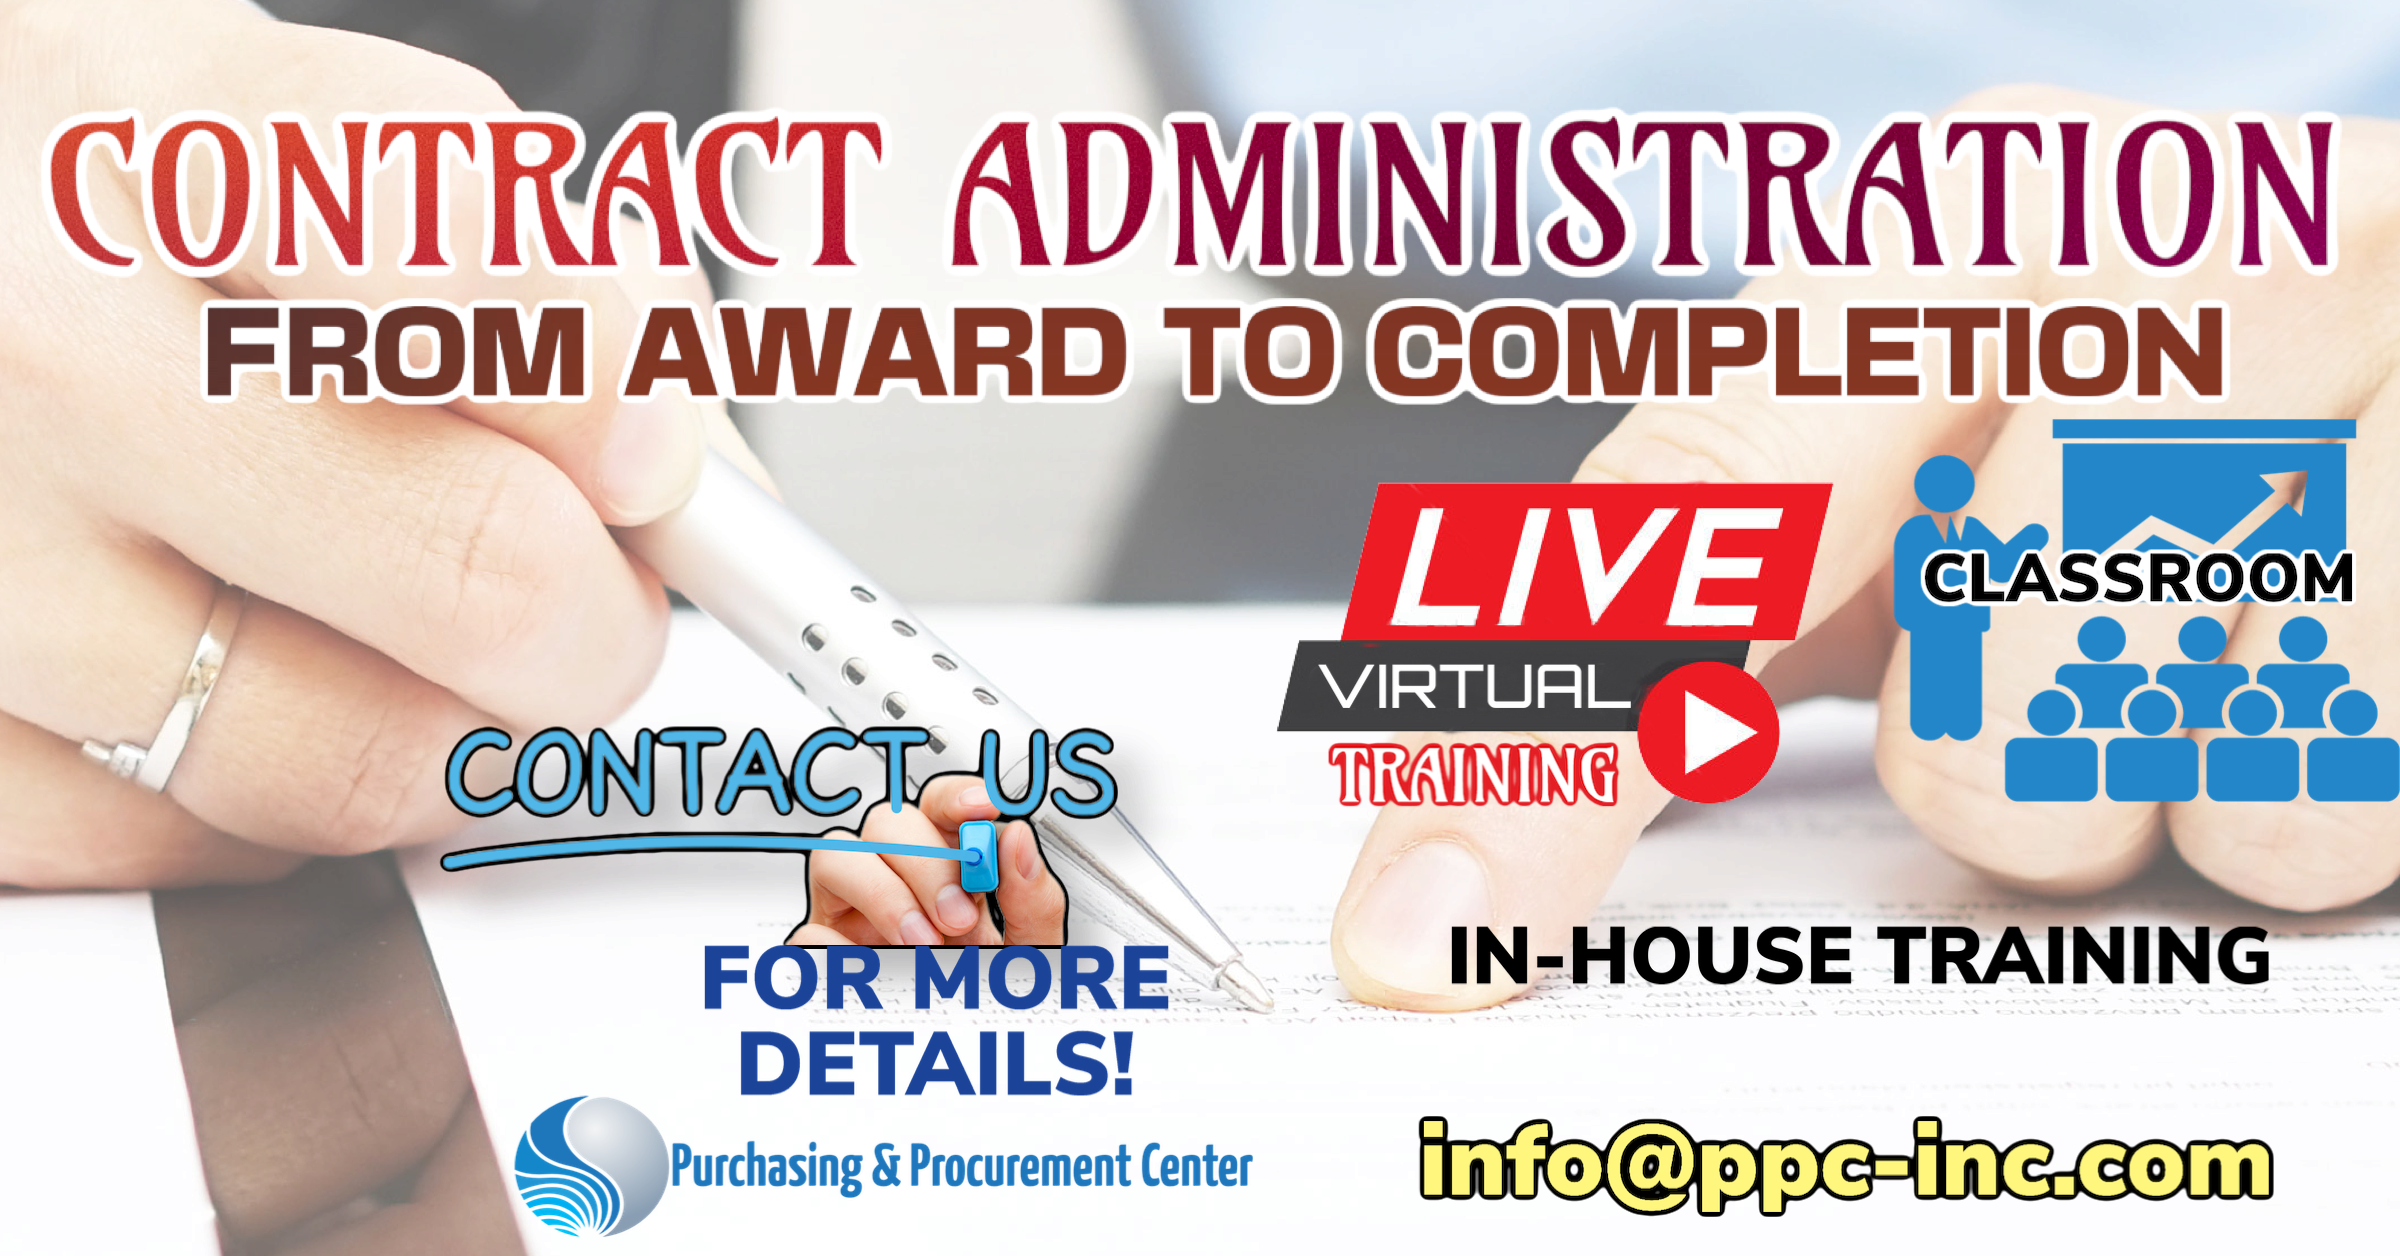 The Contract Administration course is designed as more than just a job but as an important profession essential to the organization's ability to meet its goals.